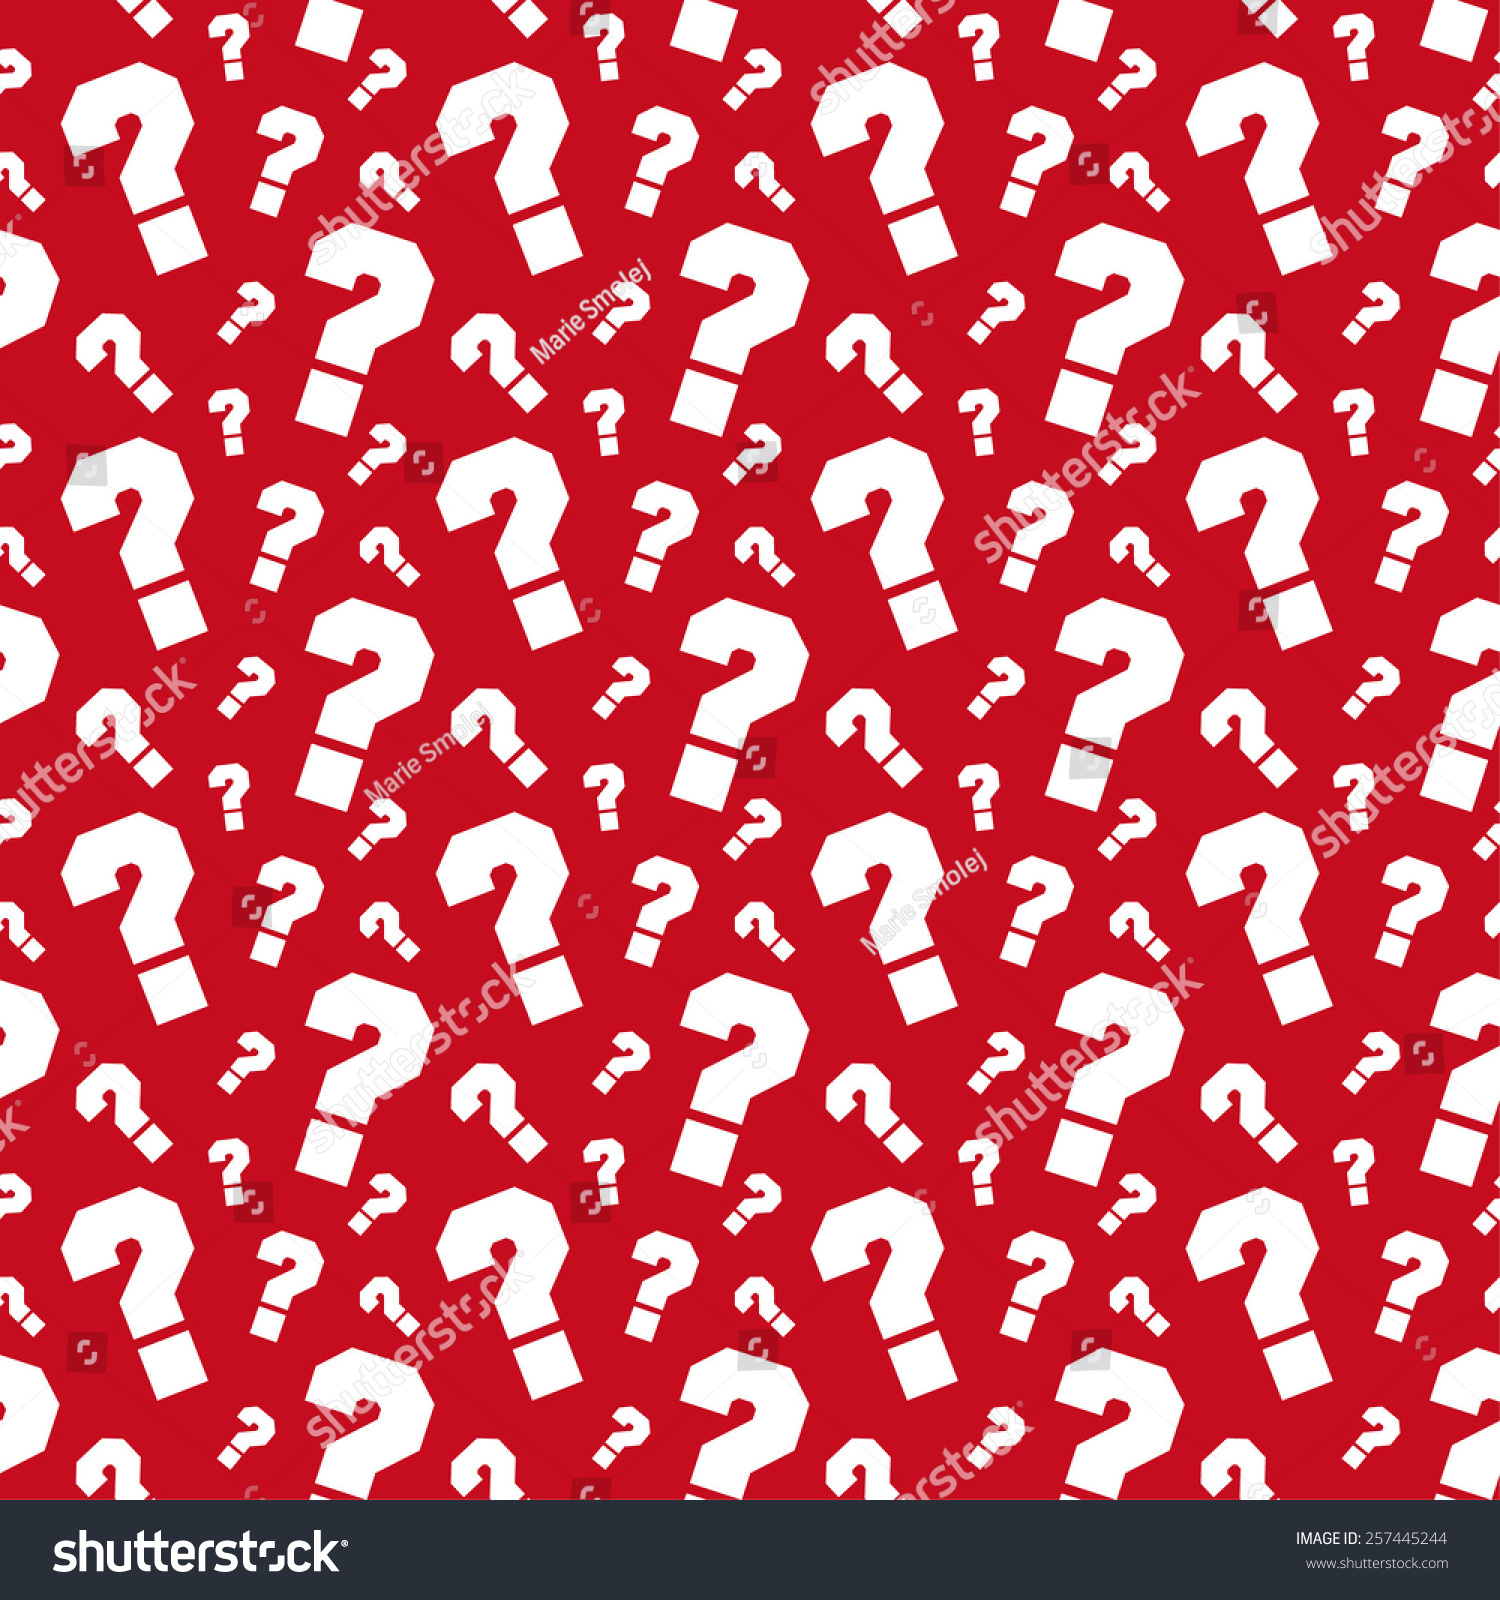 Vector Red Background Question Marks Basic Stock Vector 257445244